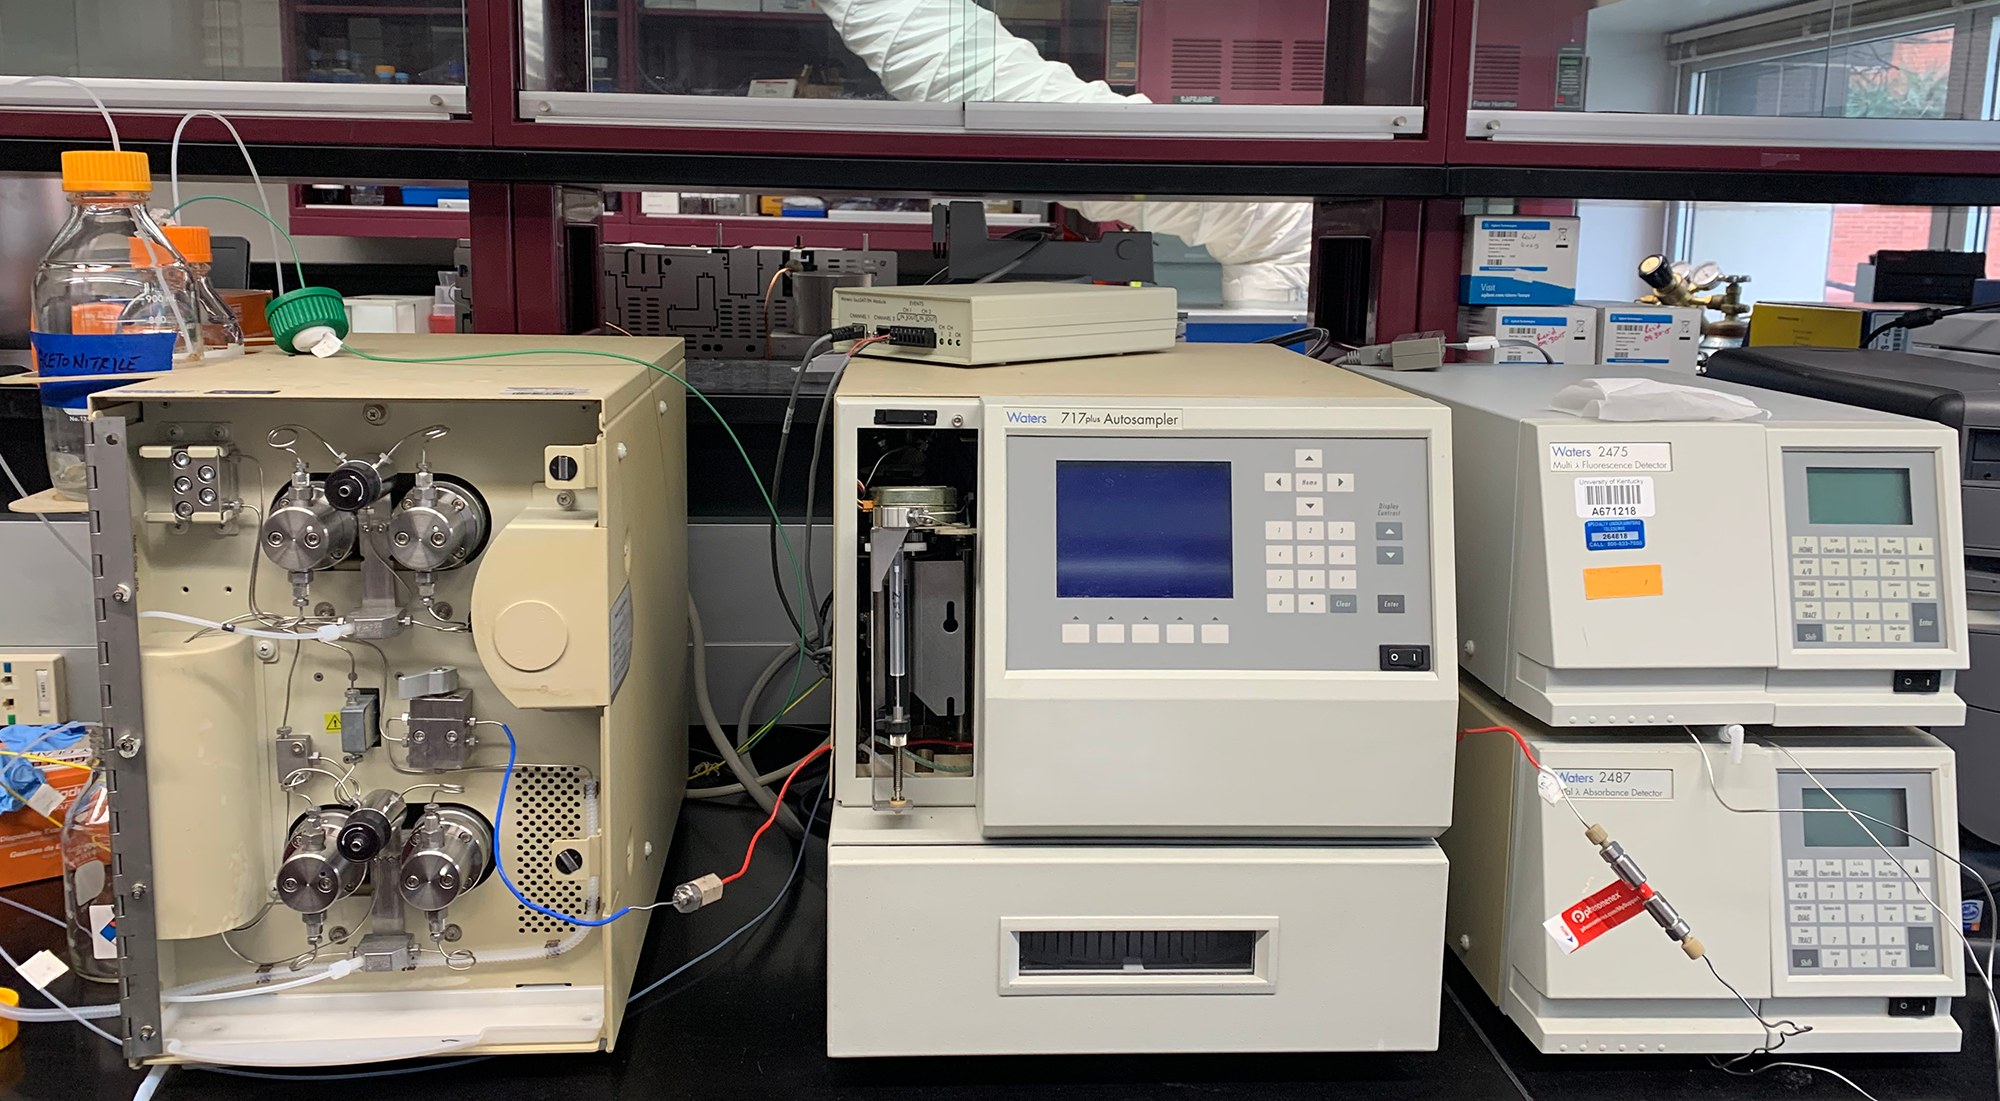 Forensic toxicology equipment within the lab.